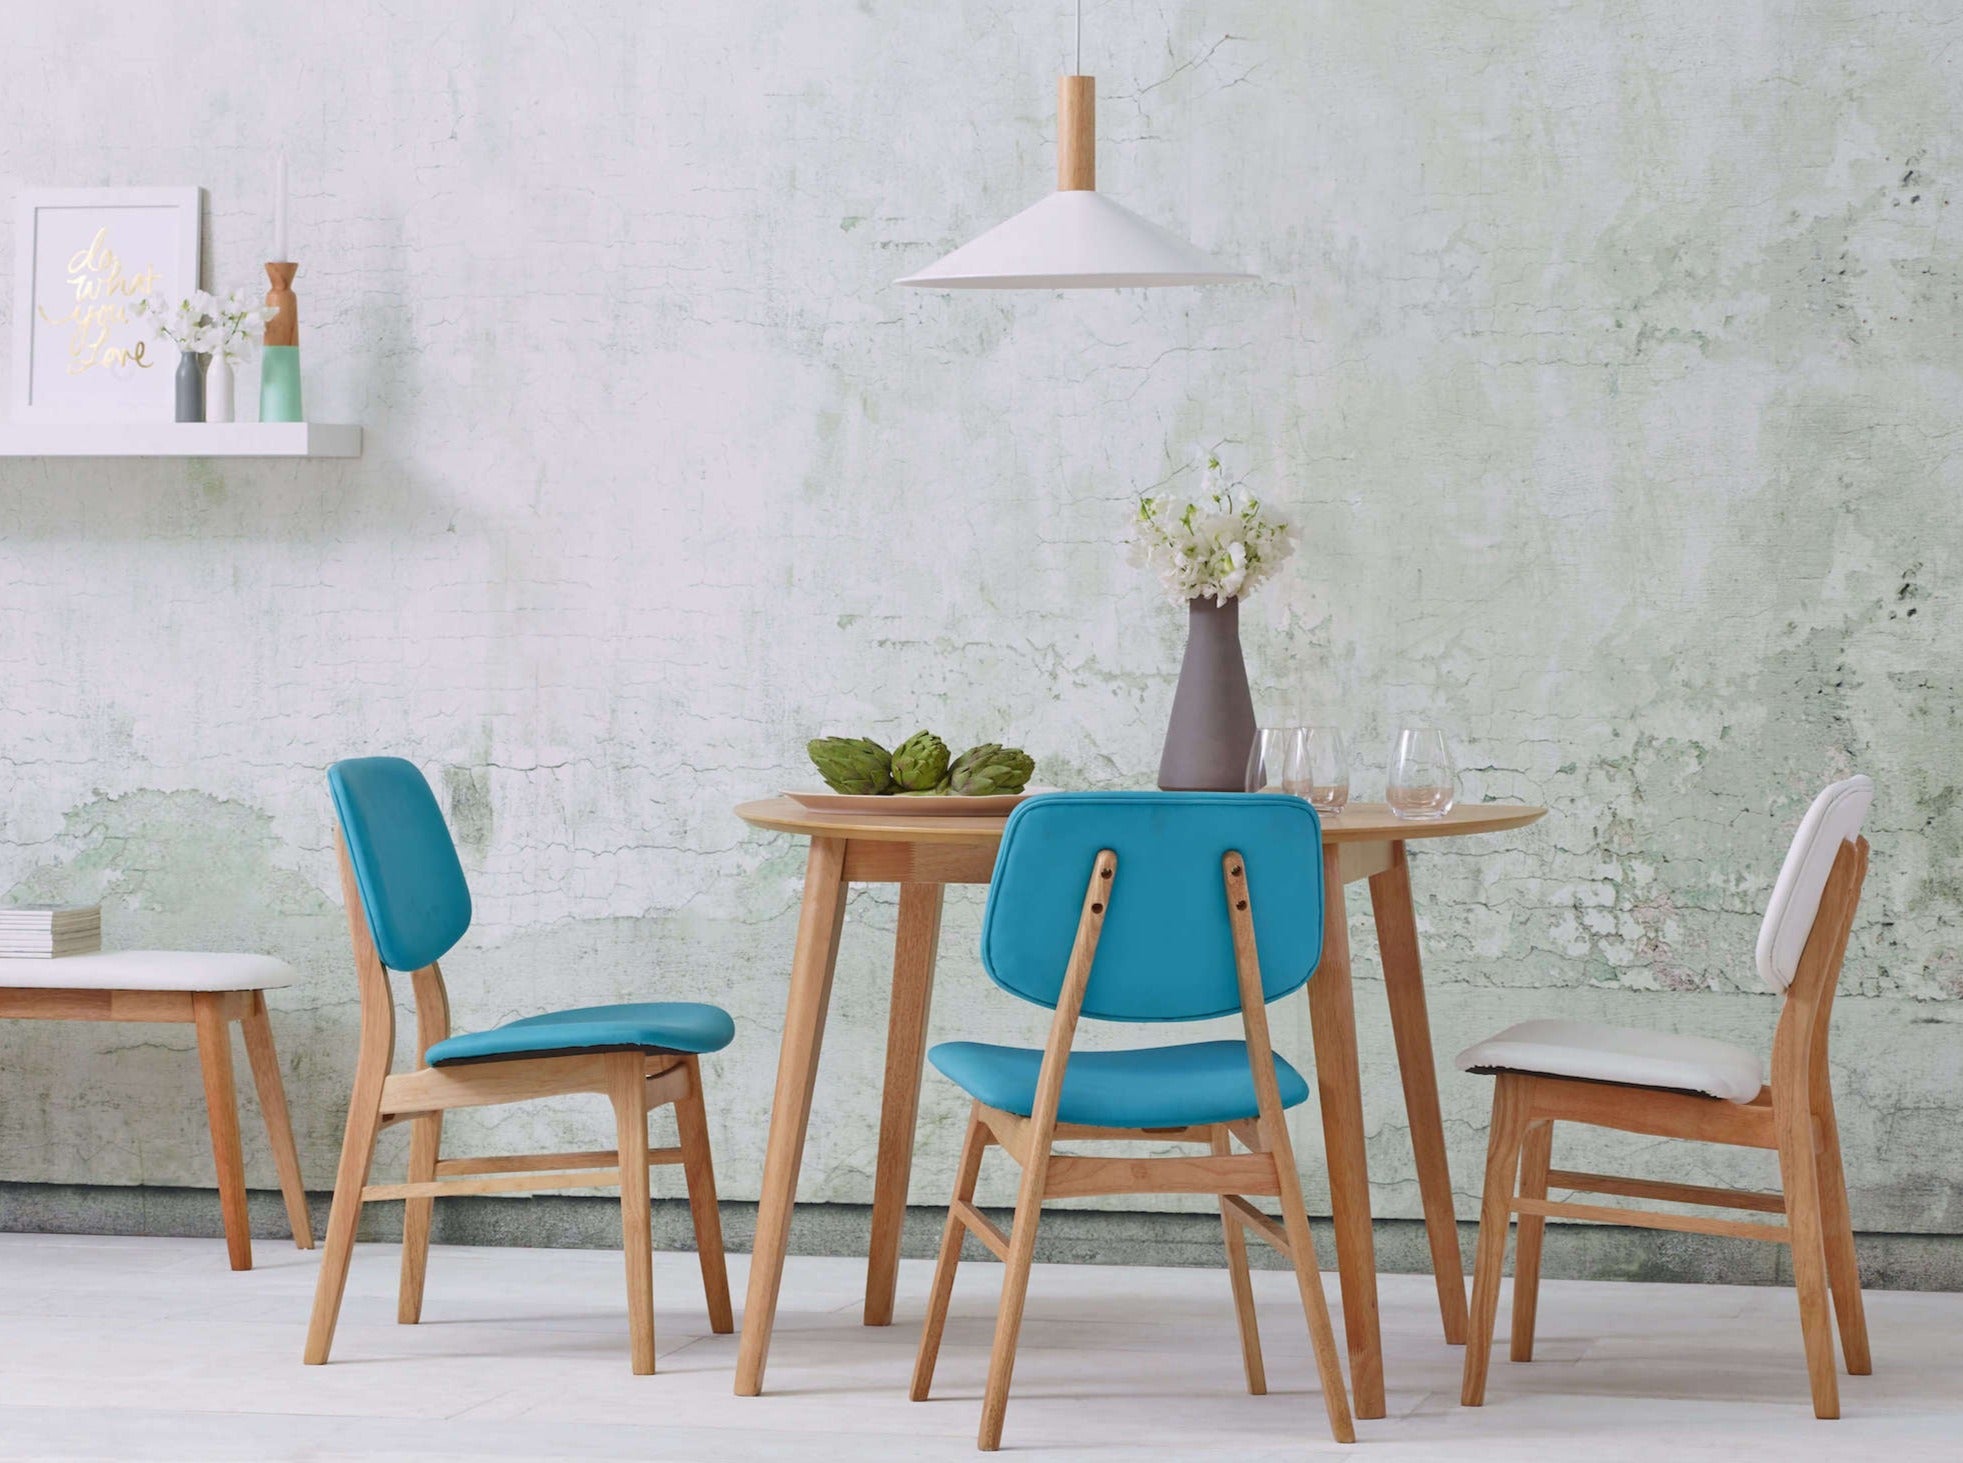 Zara Dining Collection: Tables, Benches, and Chairs in Elegant Styles